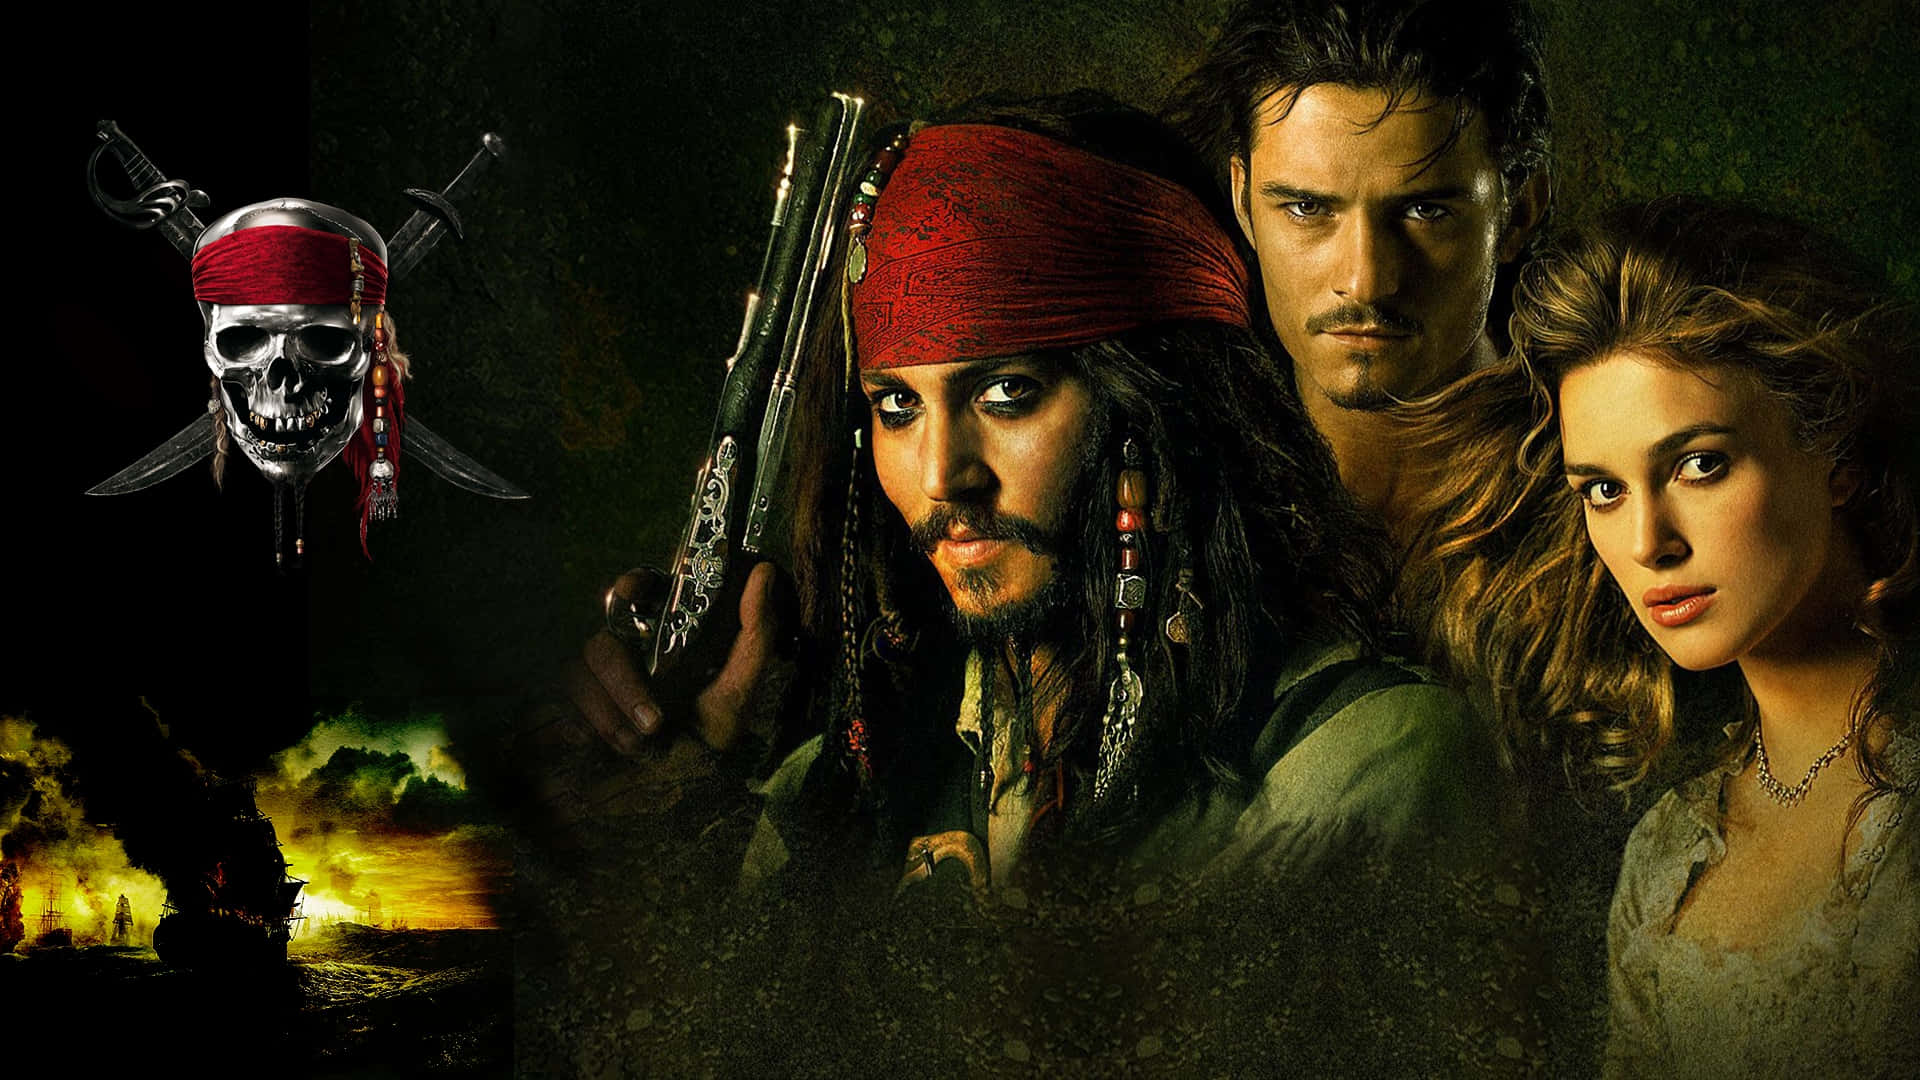 Captain Jack Sparrow in a thrilling adventure on the high seas